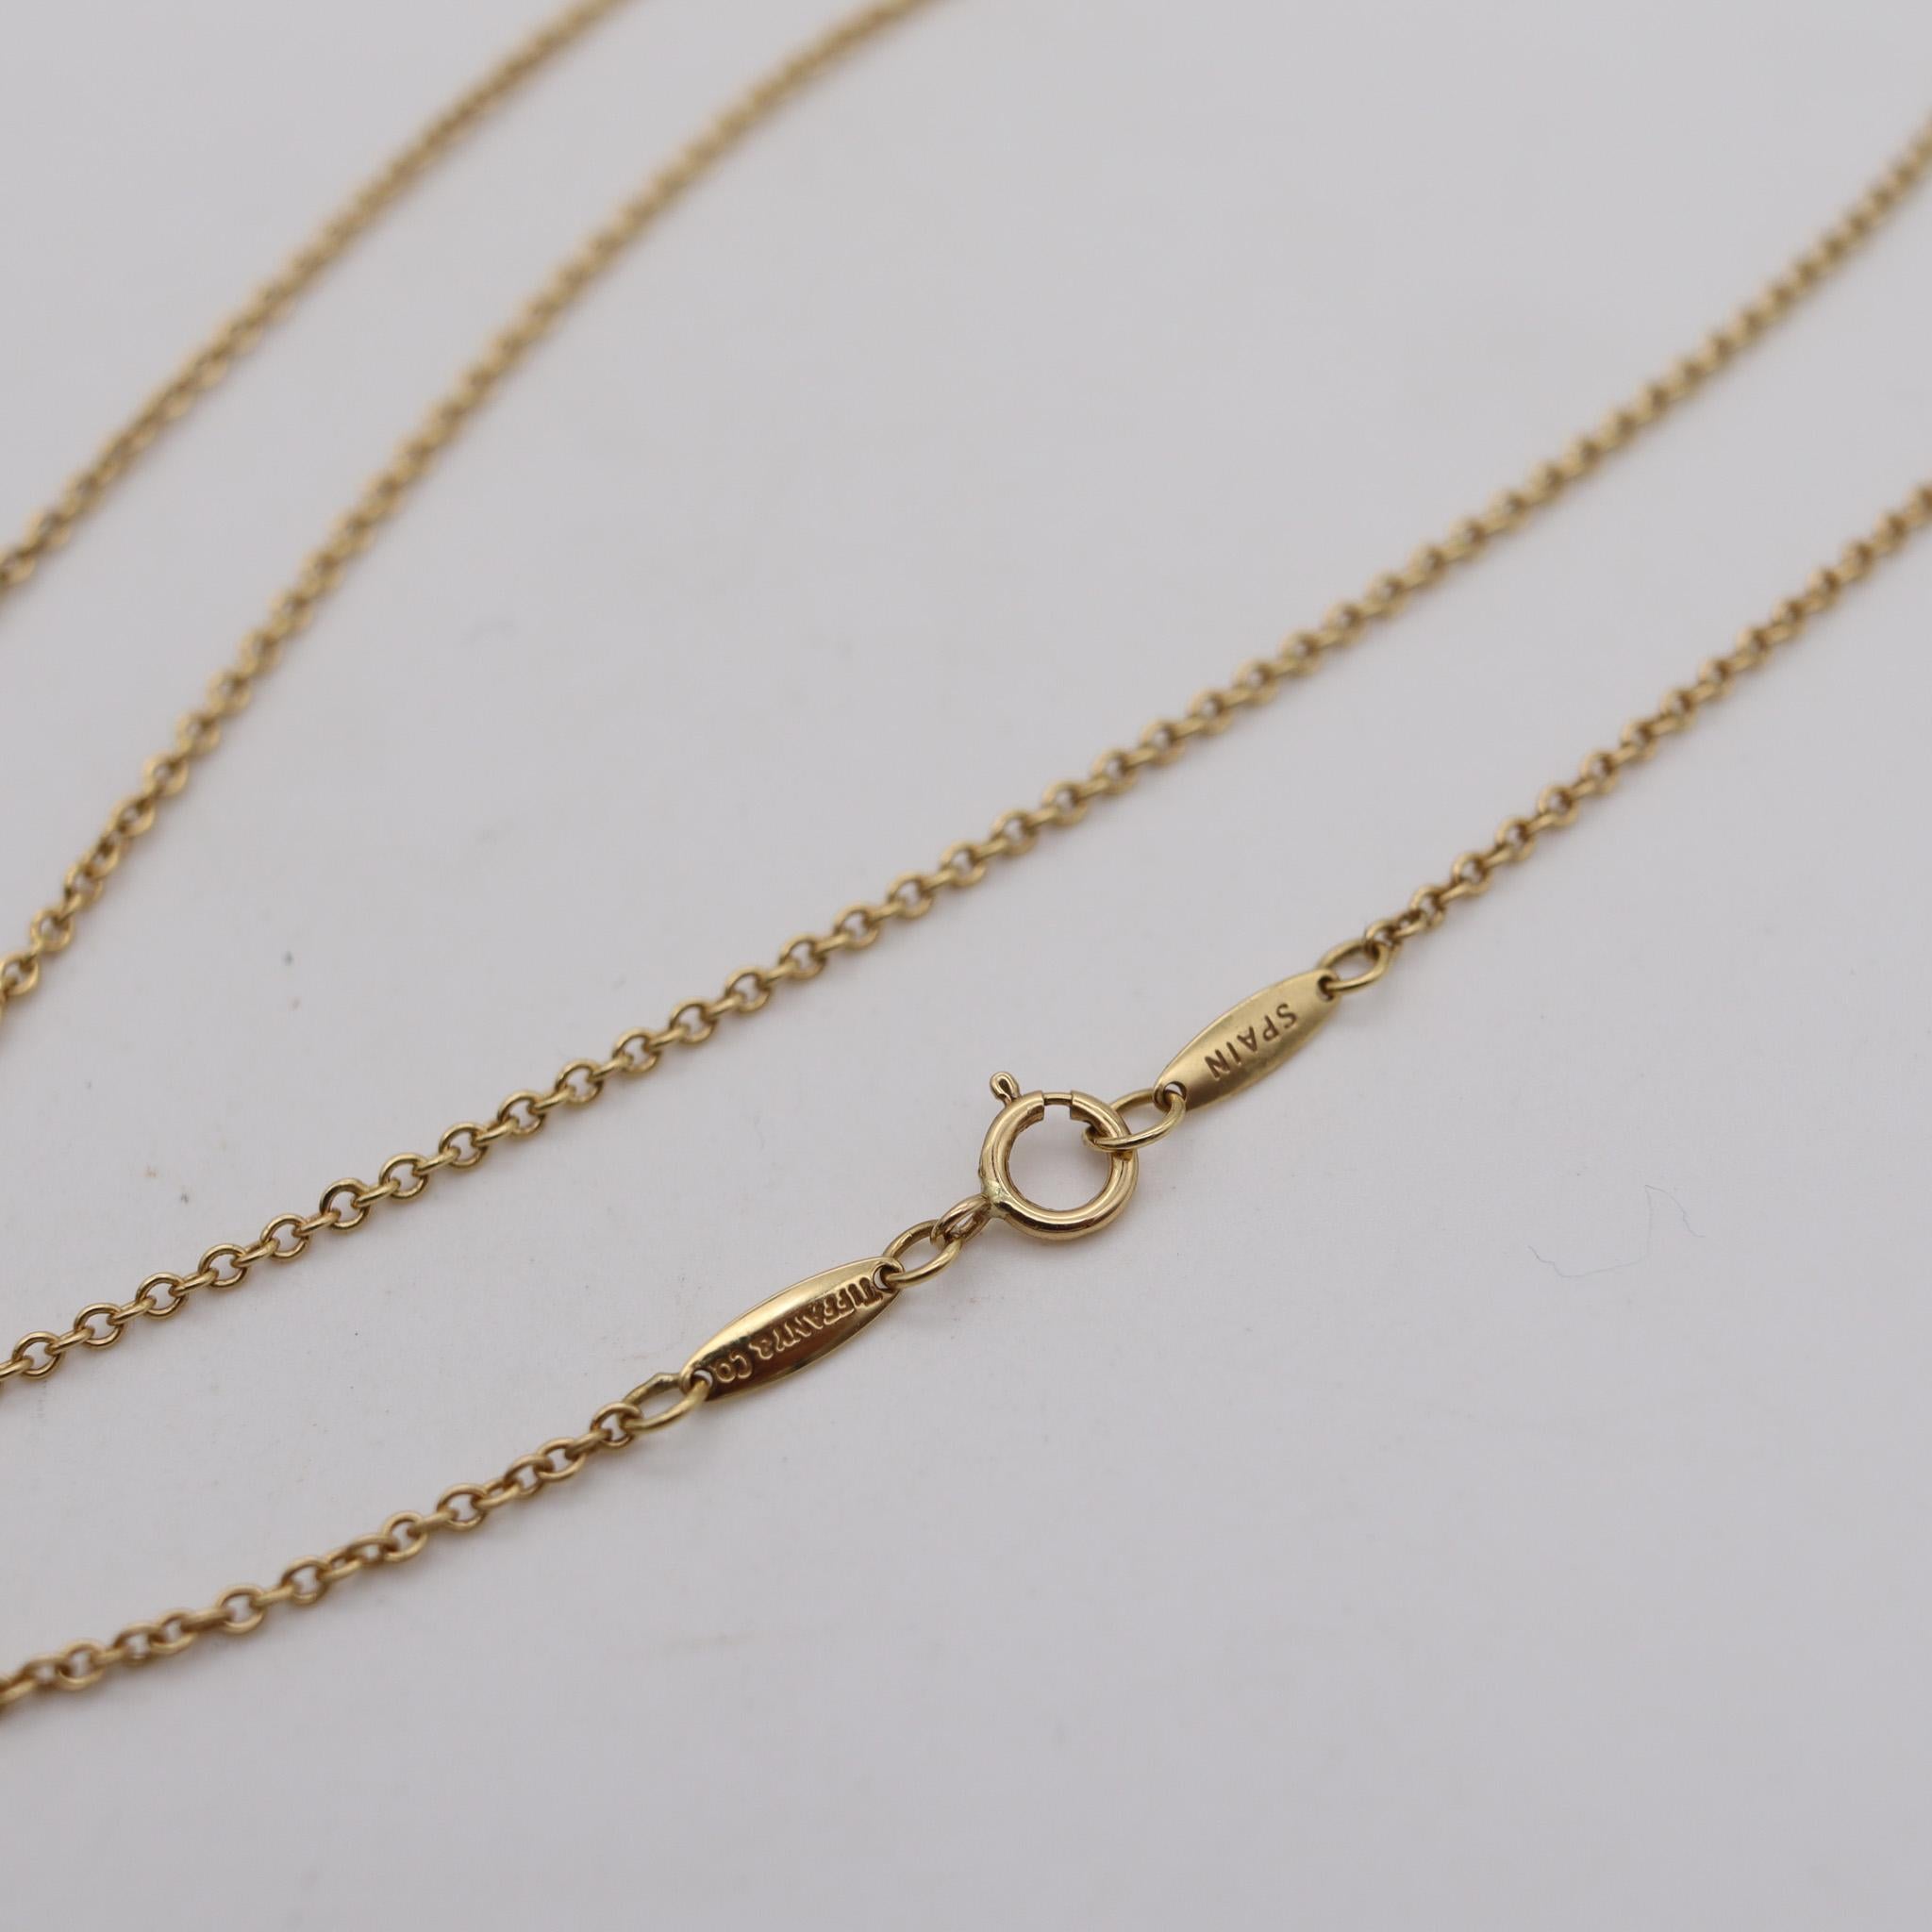 Tiffany & Co. By Elsa Peretti Scent Bottle Necklace In Solid 18Kt Yellow Gold In Excellent Condition For Sale In Miami, FL